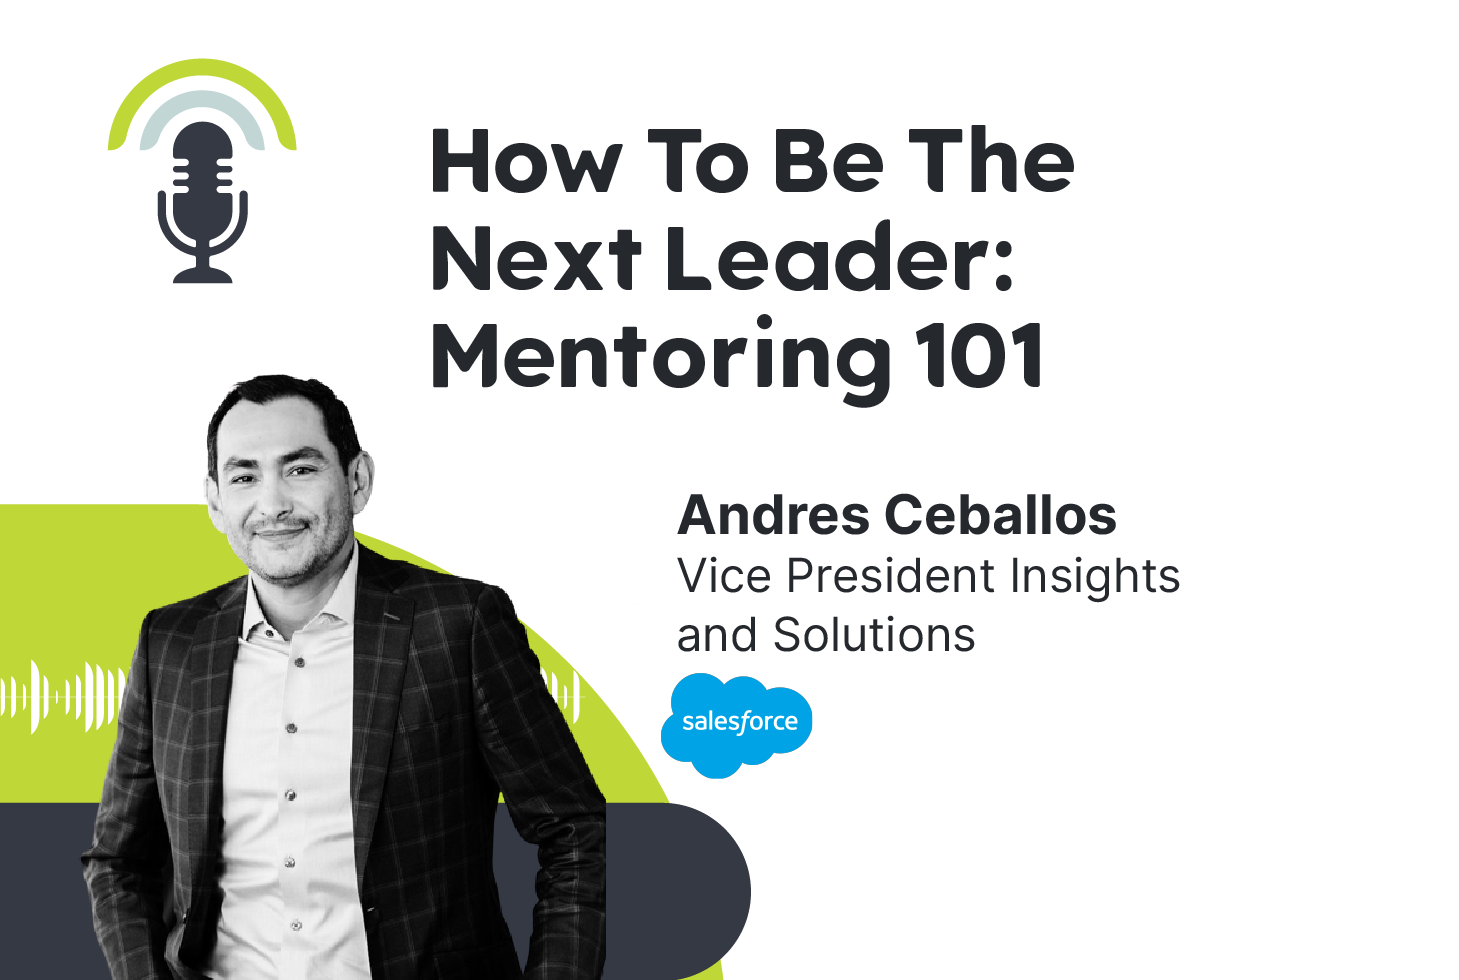 How To Be The Next Leader: Mentoring 101